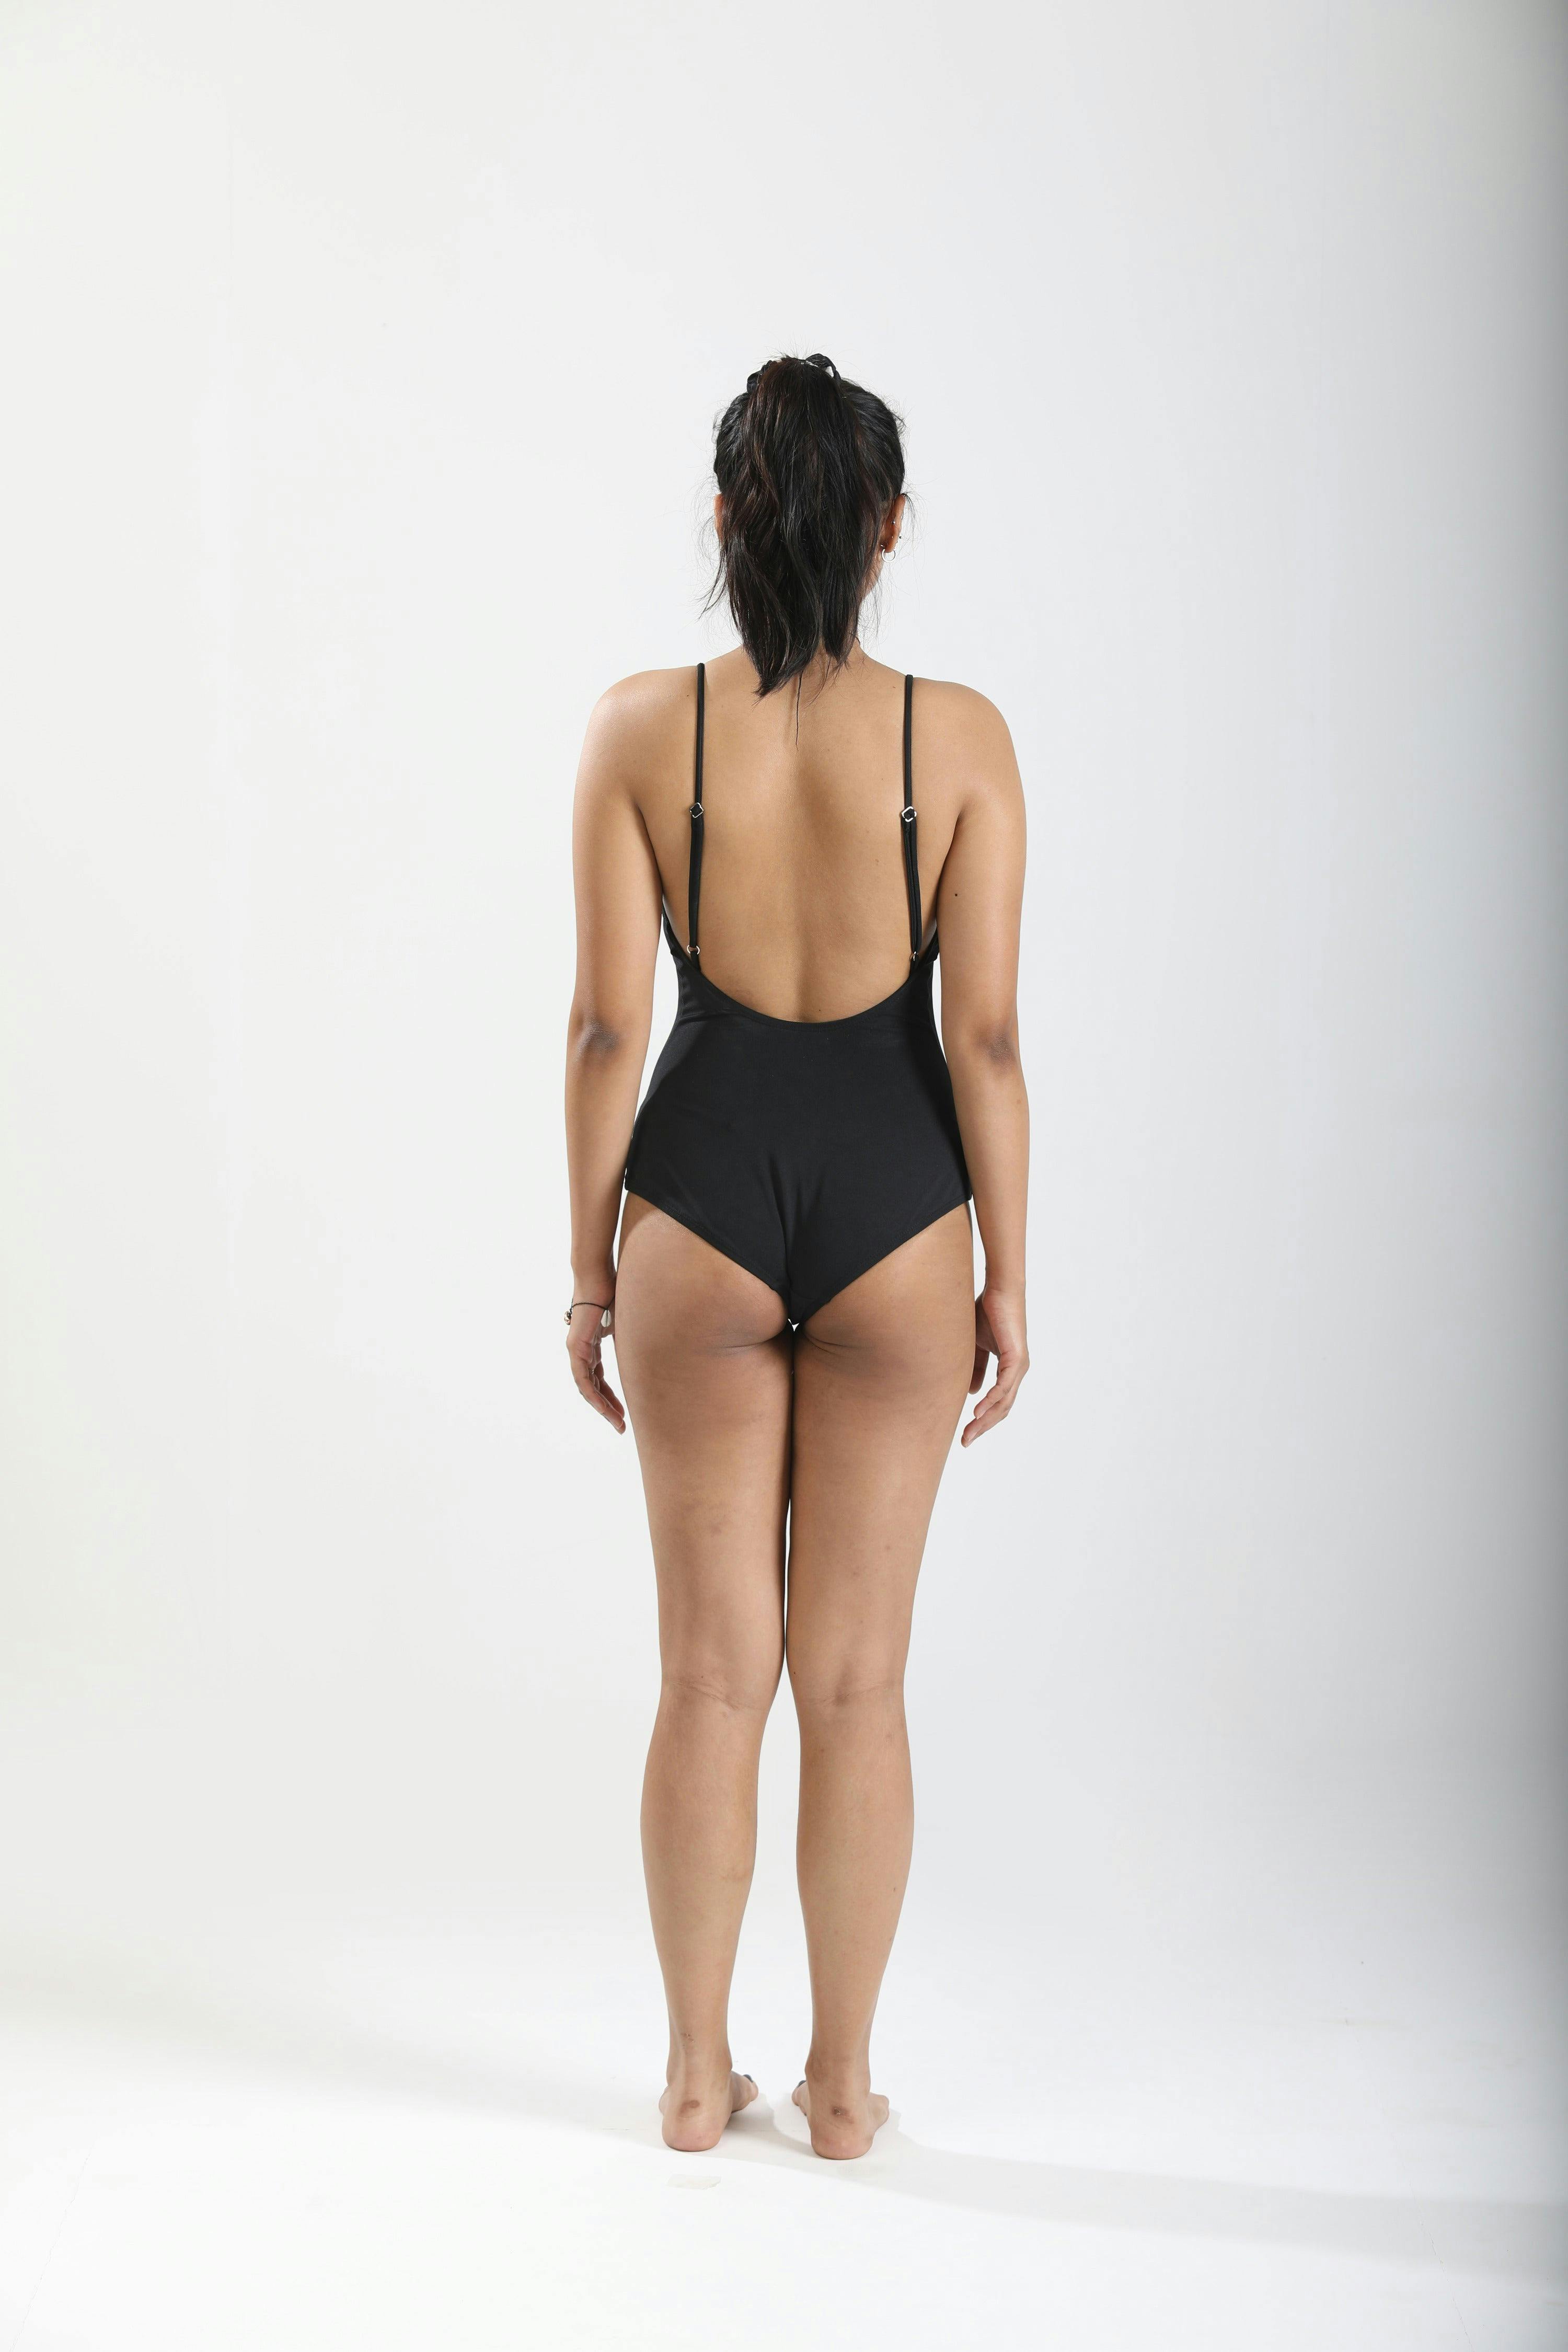 Thumbnail preview #4 for Low Back One Piece Swimsuit - Black